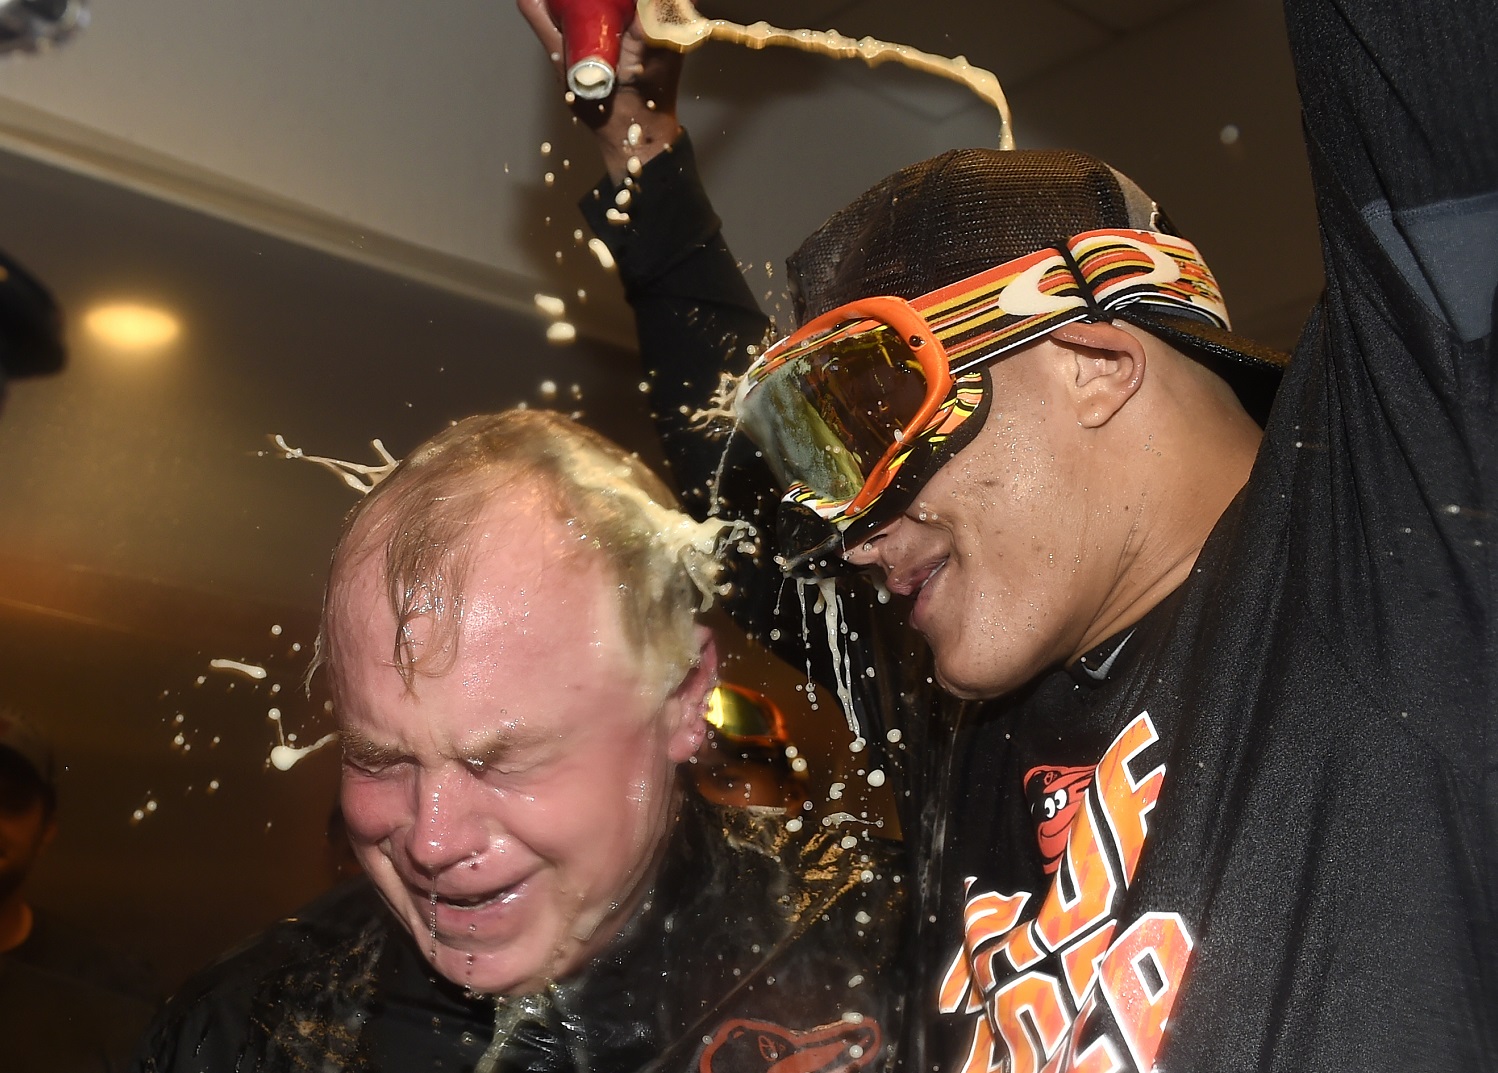 Baltimore Orioles manager Buck Showalter is doused with beer by Manny Machado in the visitors' clubhouse after the Orioles defeated the New York Yankees 5-2 in a baseball game to go to the playoffs , Sunday, Oct. 2, 2016, in New York. (AP Photo/Kathy Kmonicek)